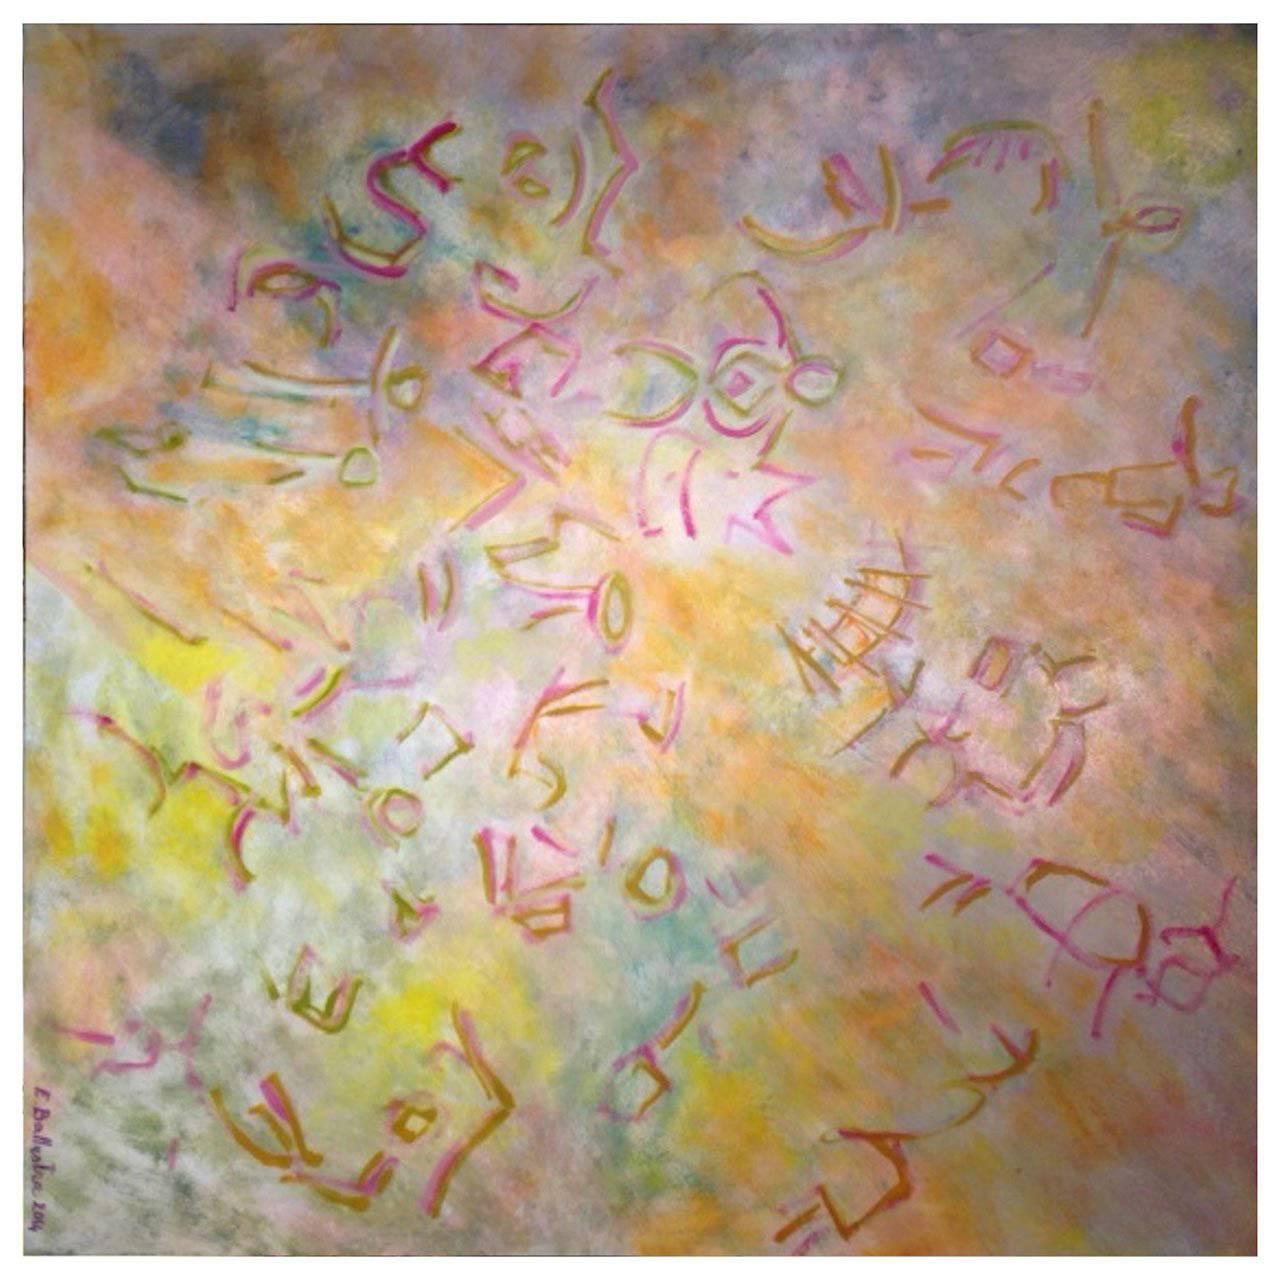 Oil on Canvas by Evelyne Ballestra, "Birth of writing Logogram"